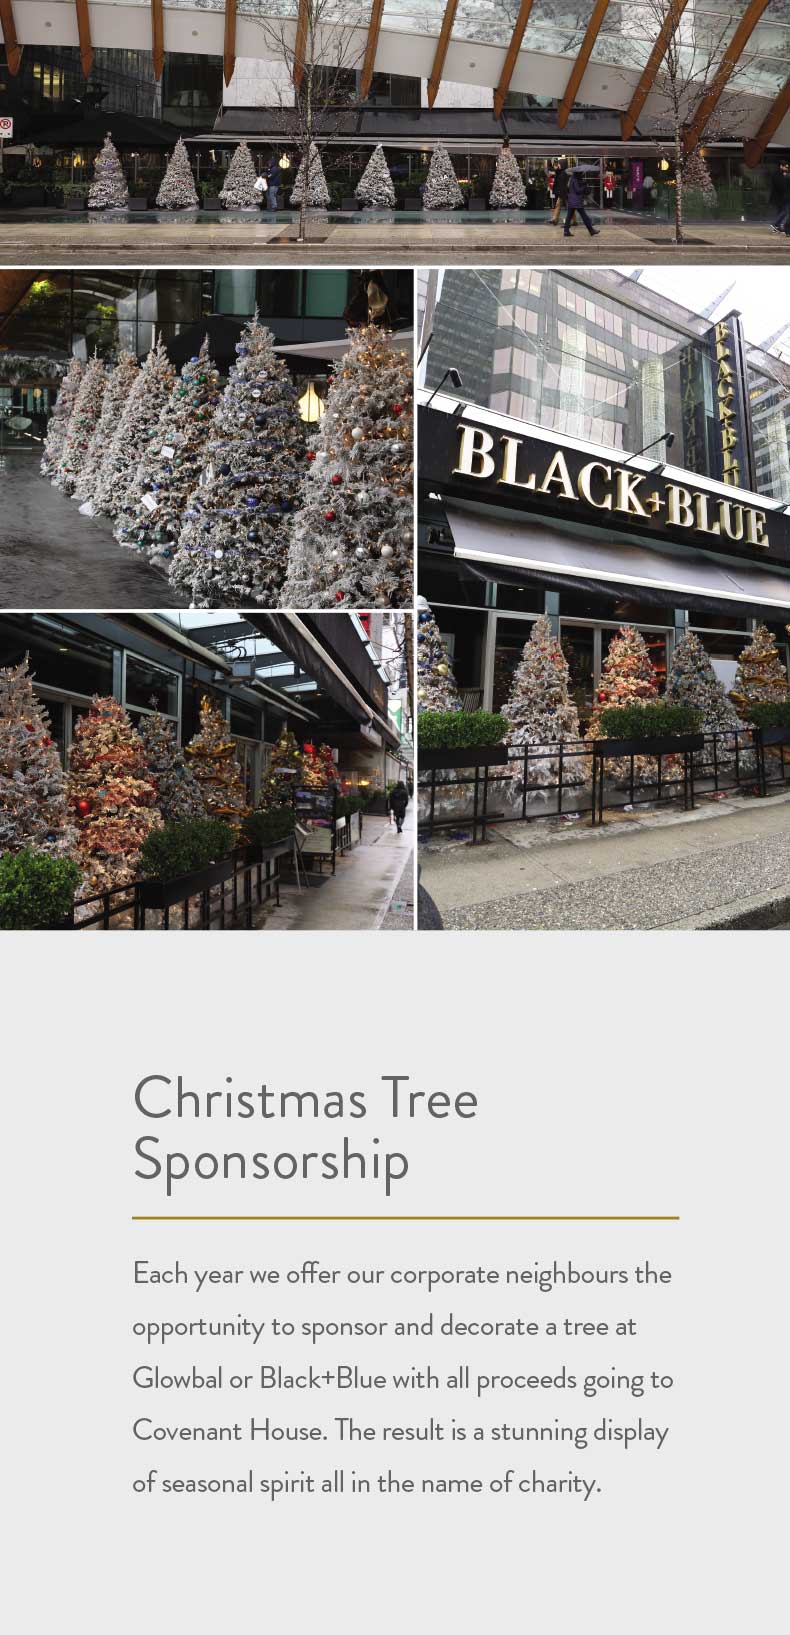 Each year we offer our corporate neighbours the opportunity to sponsor and decorate a tree at Glowbal or Black+Blue with all proceeds going to Covenant House. The result is a stunning display of seasonal spirit all in the name of charity.